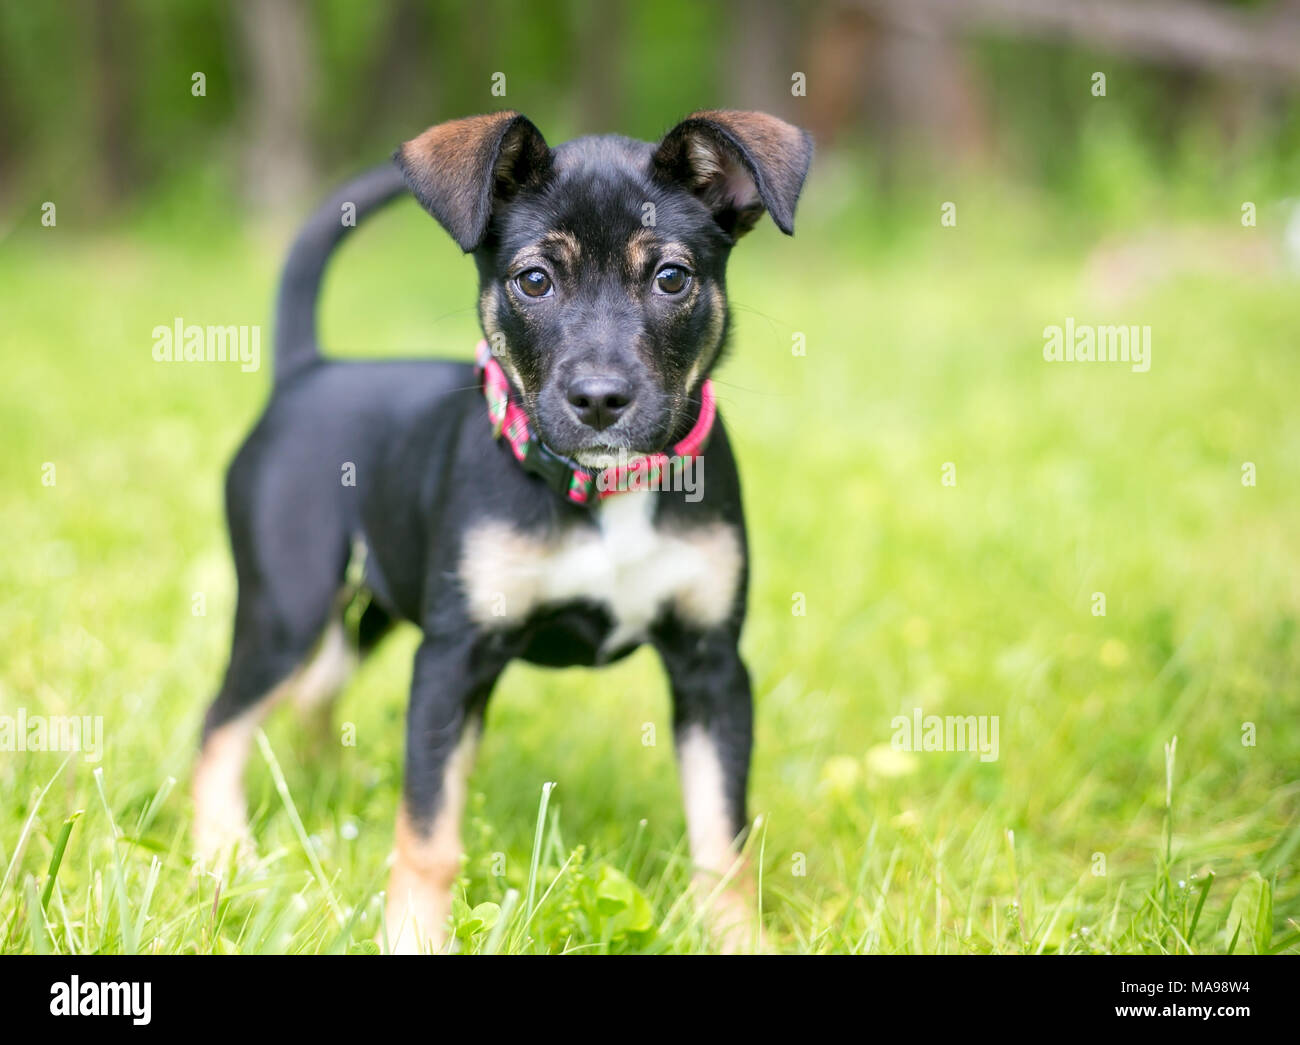 A cute German Shepherd mixed breed puppy outdoors Stock Photo - Alamy